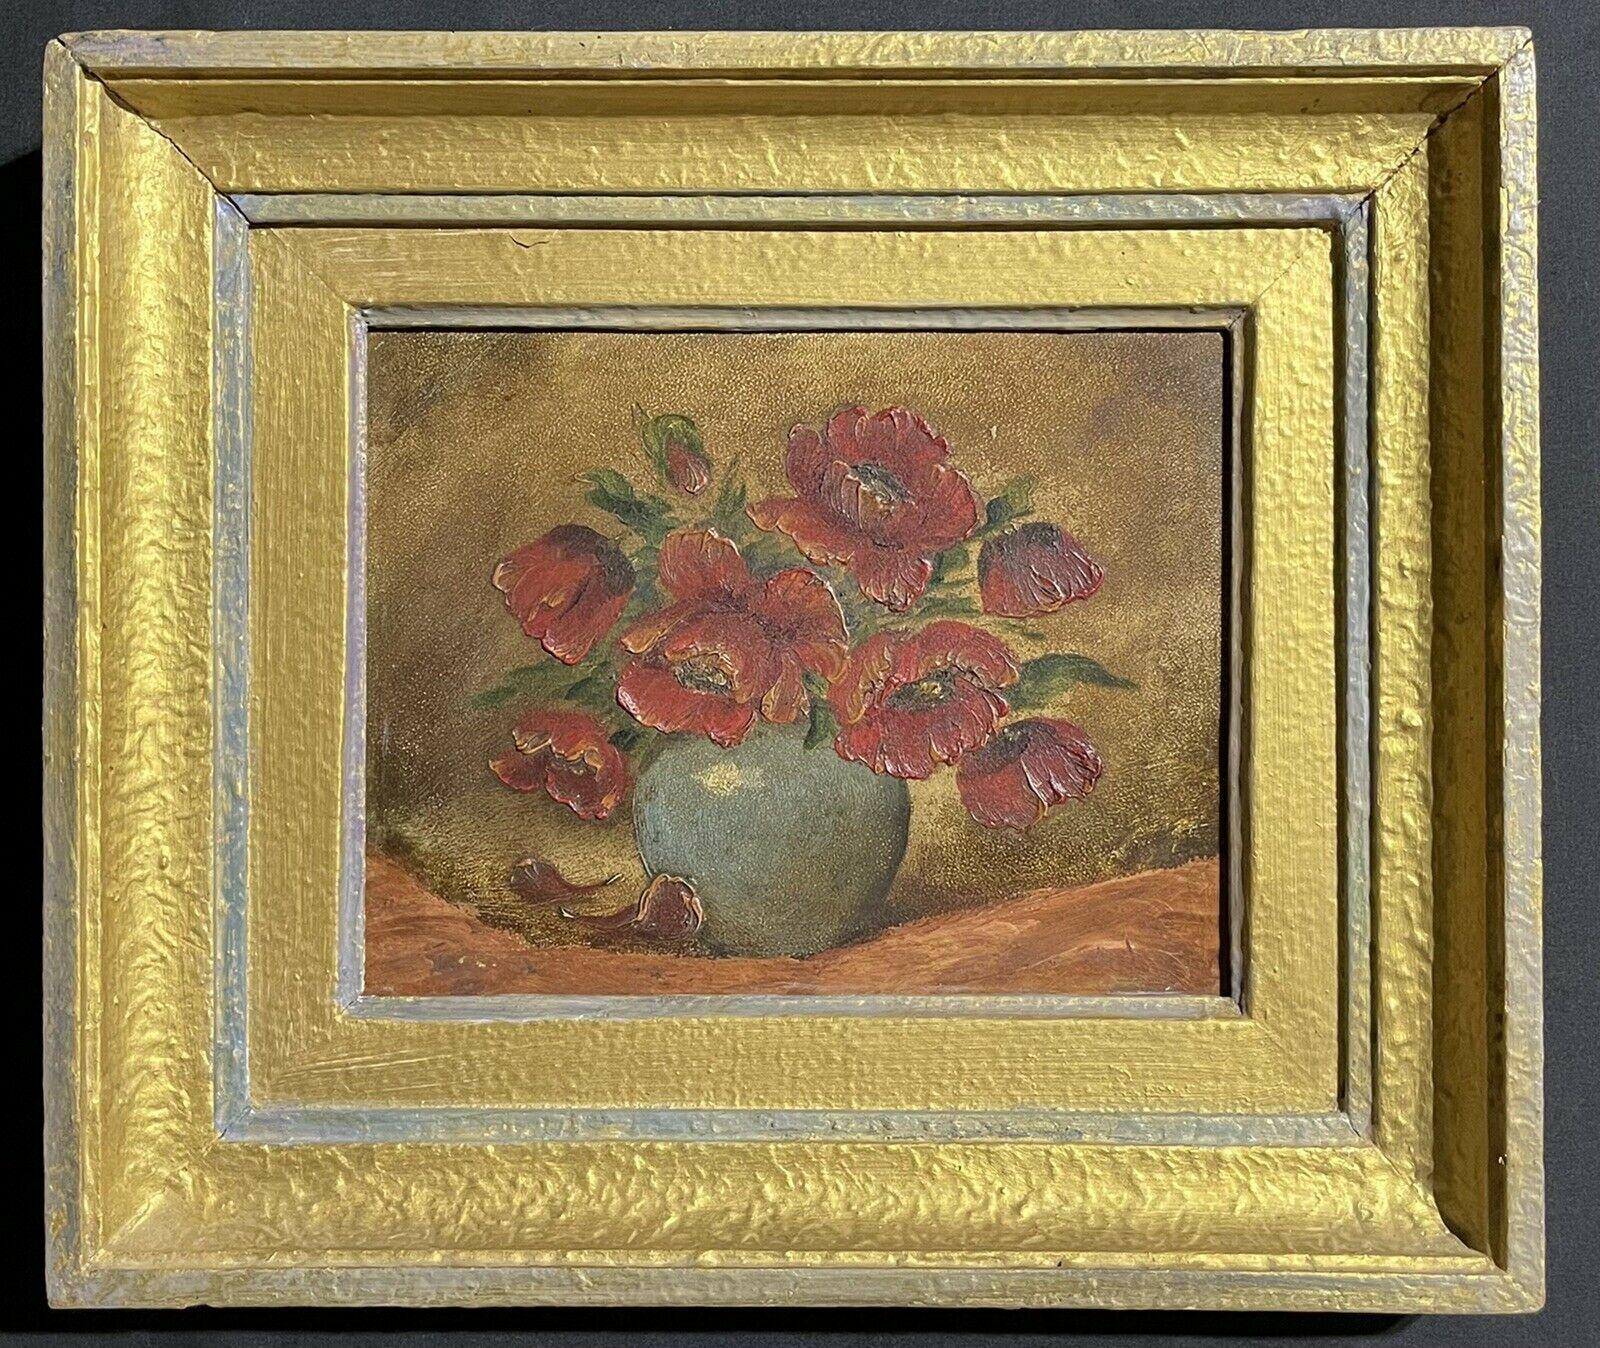 VINTAGE FRENCH OIL PAINTING - STILL LIFE OF FLOWERS IN BOWL - FRAMED - Painting by Unknown